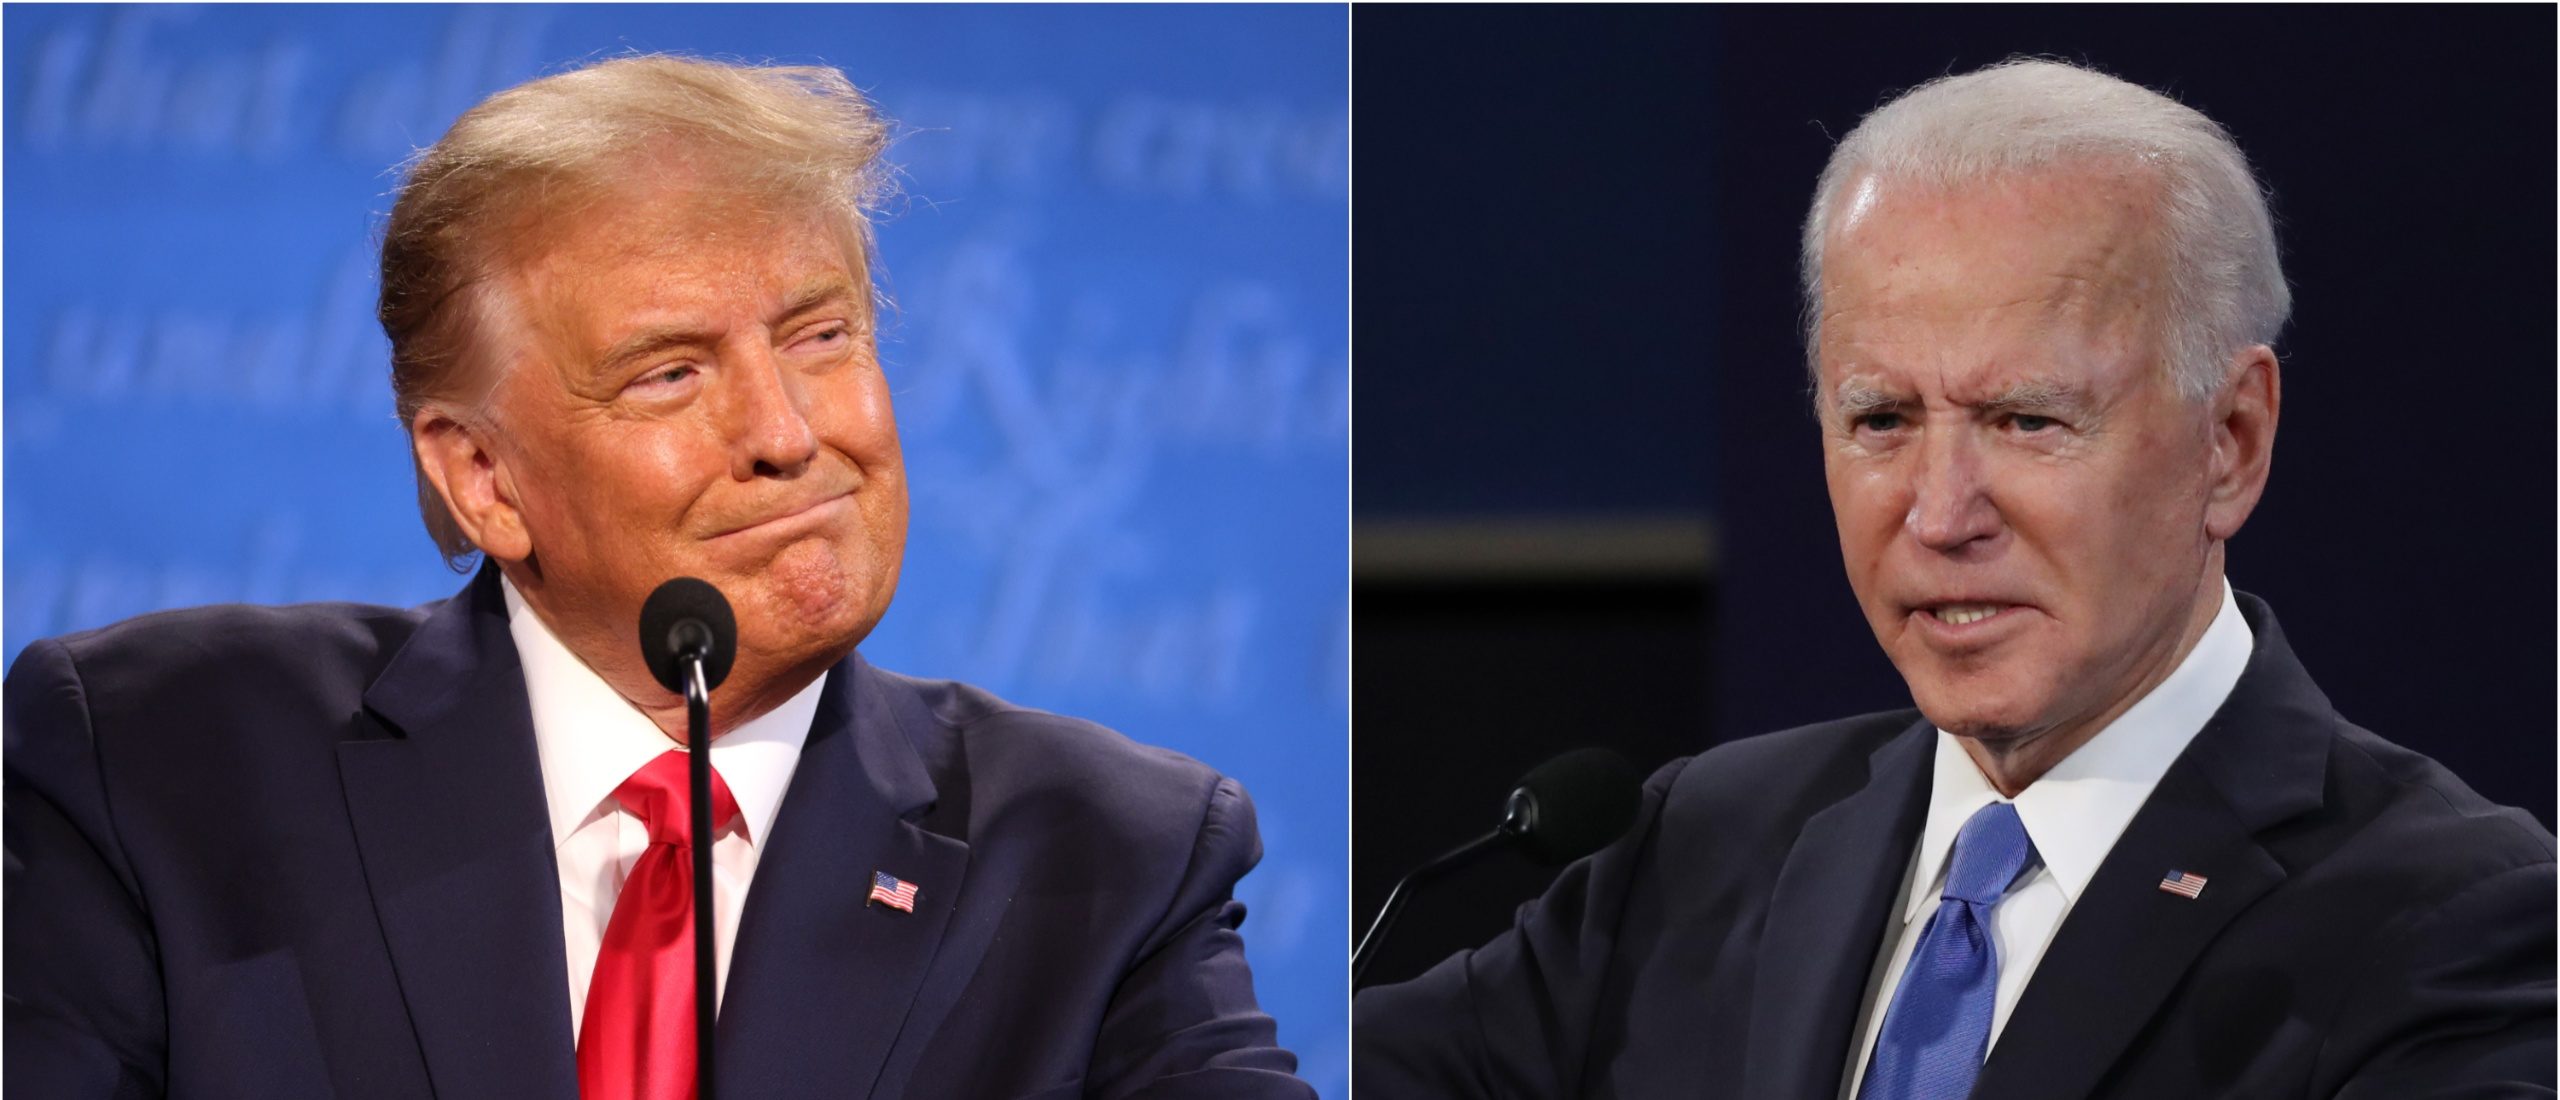 NASHVILLE, TENNESSEE - OCTOBER 22: U.S. President Donald Trump participates in the final presidential debate against Democratic presidential nominee Joe Biden at Belmont University on October 22, 2020 in Nashville, Tennessee. This is the last debate between the two candidates before the election on November 3. (Photo by Justin Sullivan/Getty Images) NASHVILLE, TENNESSEE - OCTOBER 22: Democratic presidential nominee Joe Biden participates in the final presidential debate against U.S. President Donald Trump at Belmont University on October 22, 2020 in Nashville, Tennessee. This is the last debate between the two candidates before the election on November 3. (Photo by Chip Somodevilla/Getty Images)